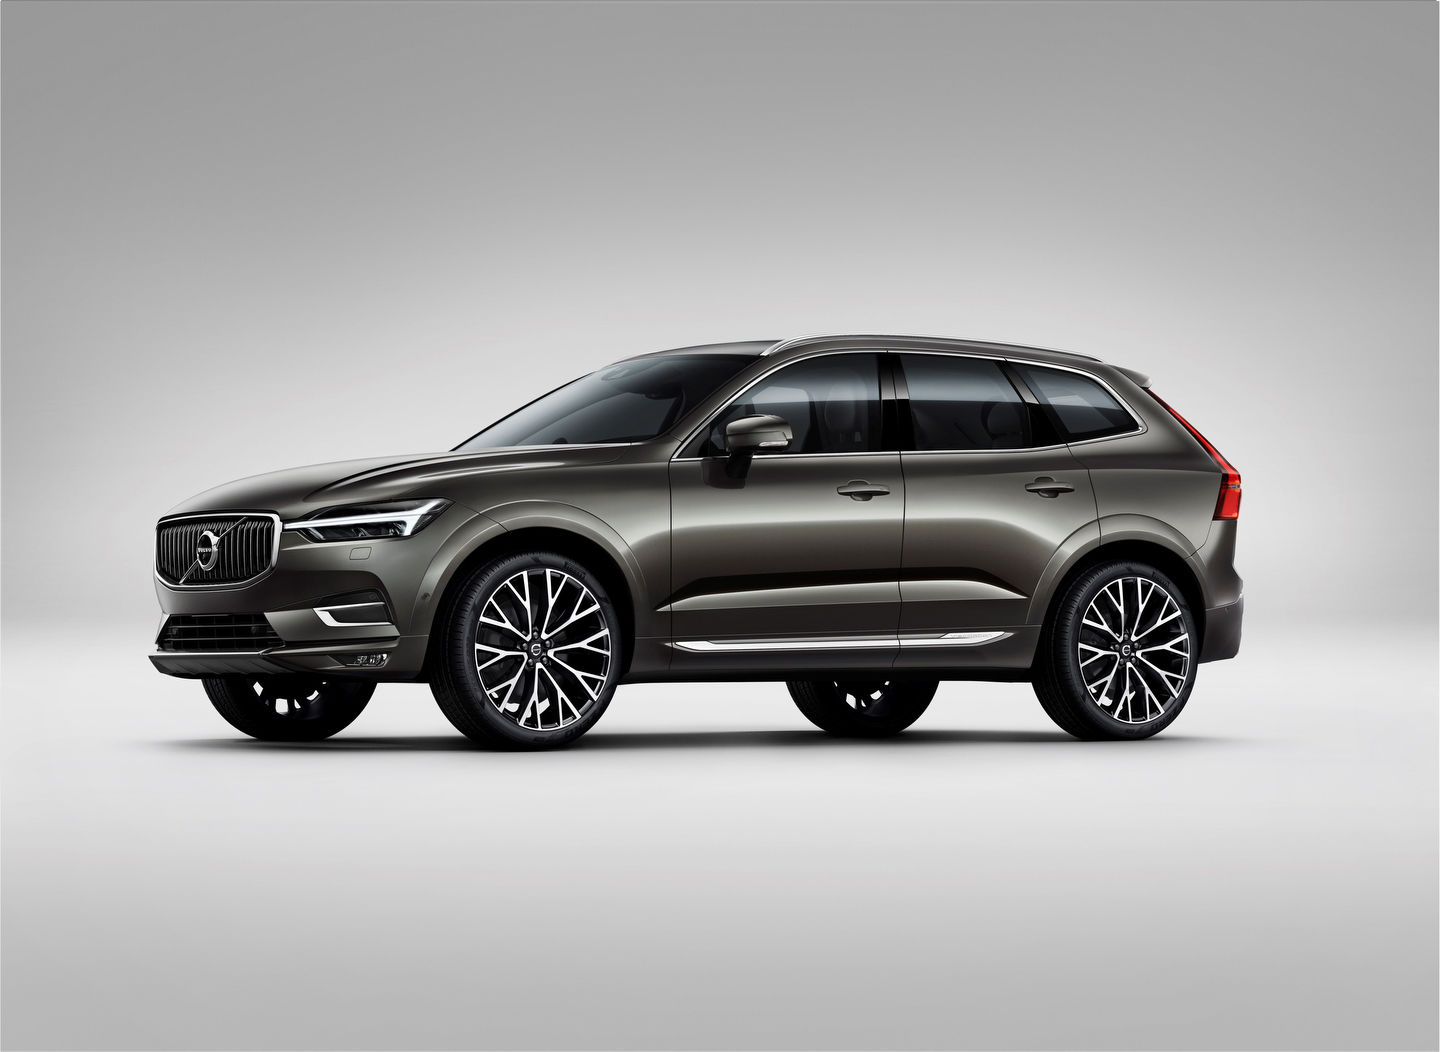 2021 Volvo XC60 vs. 2021 BMW X3: The XC60 Extends Comfort and Efficiency